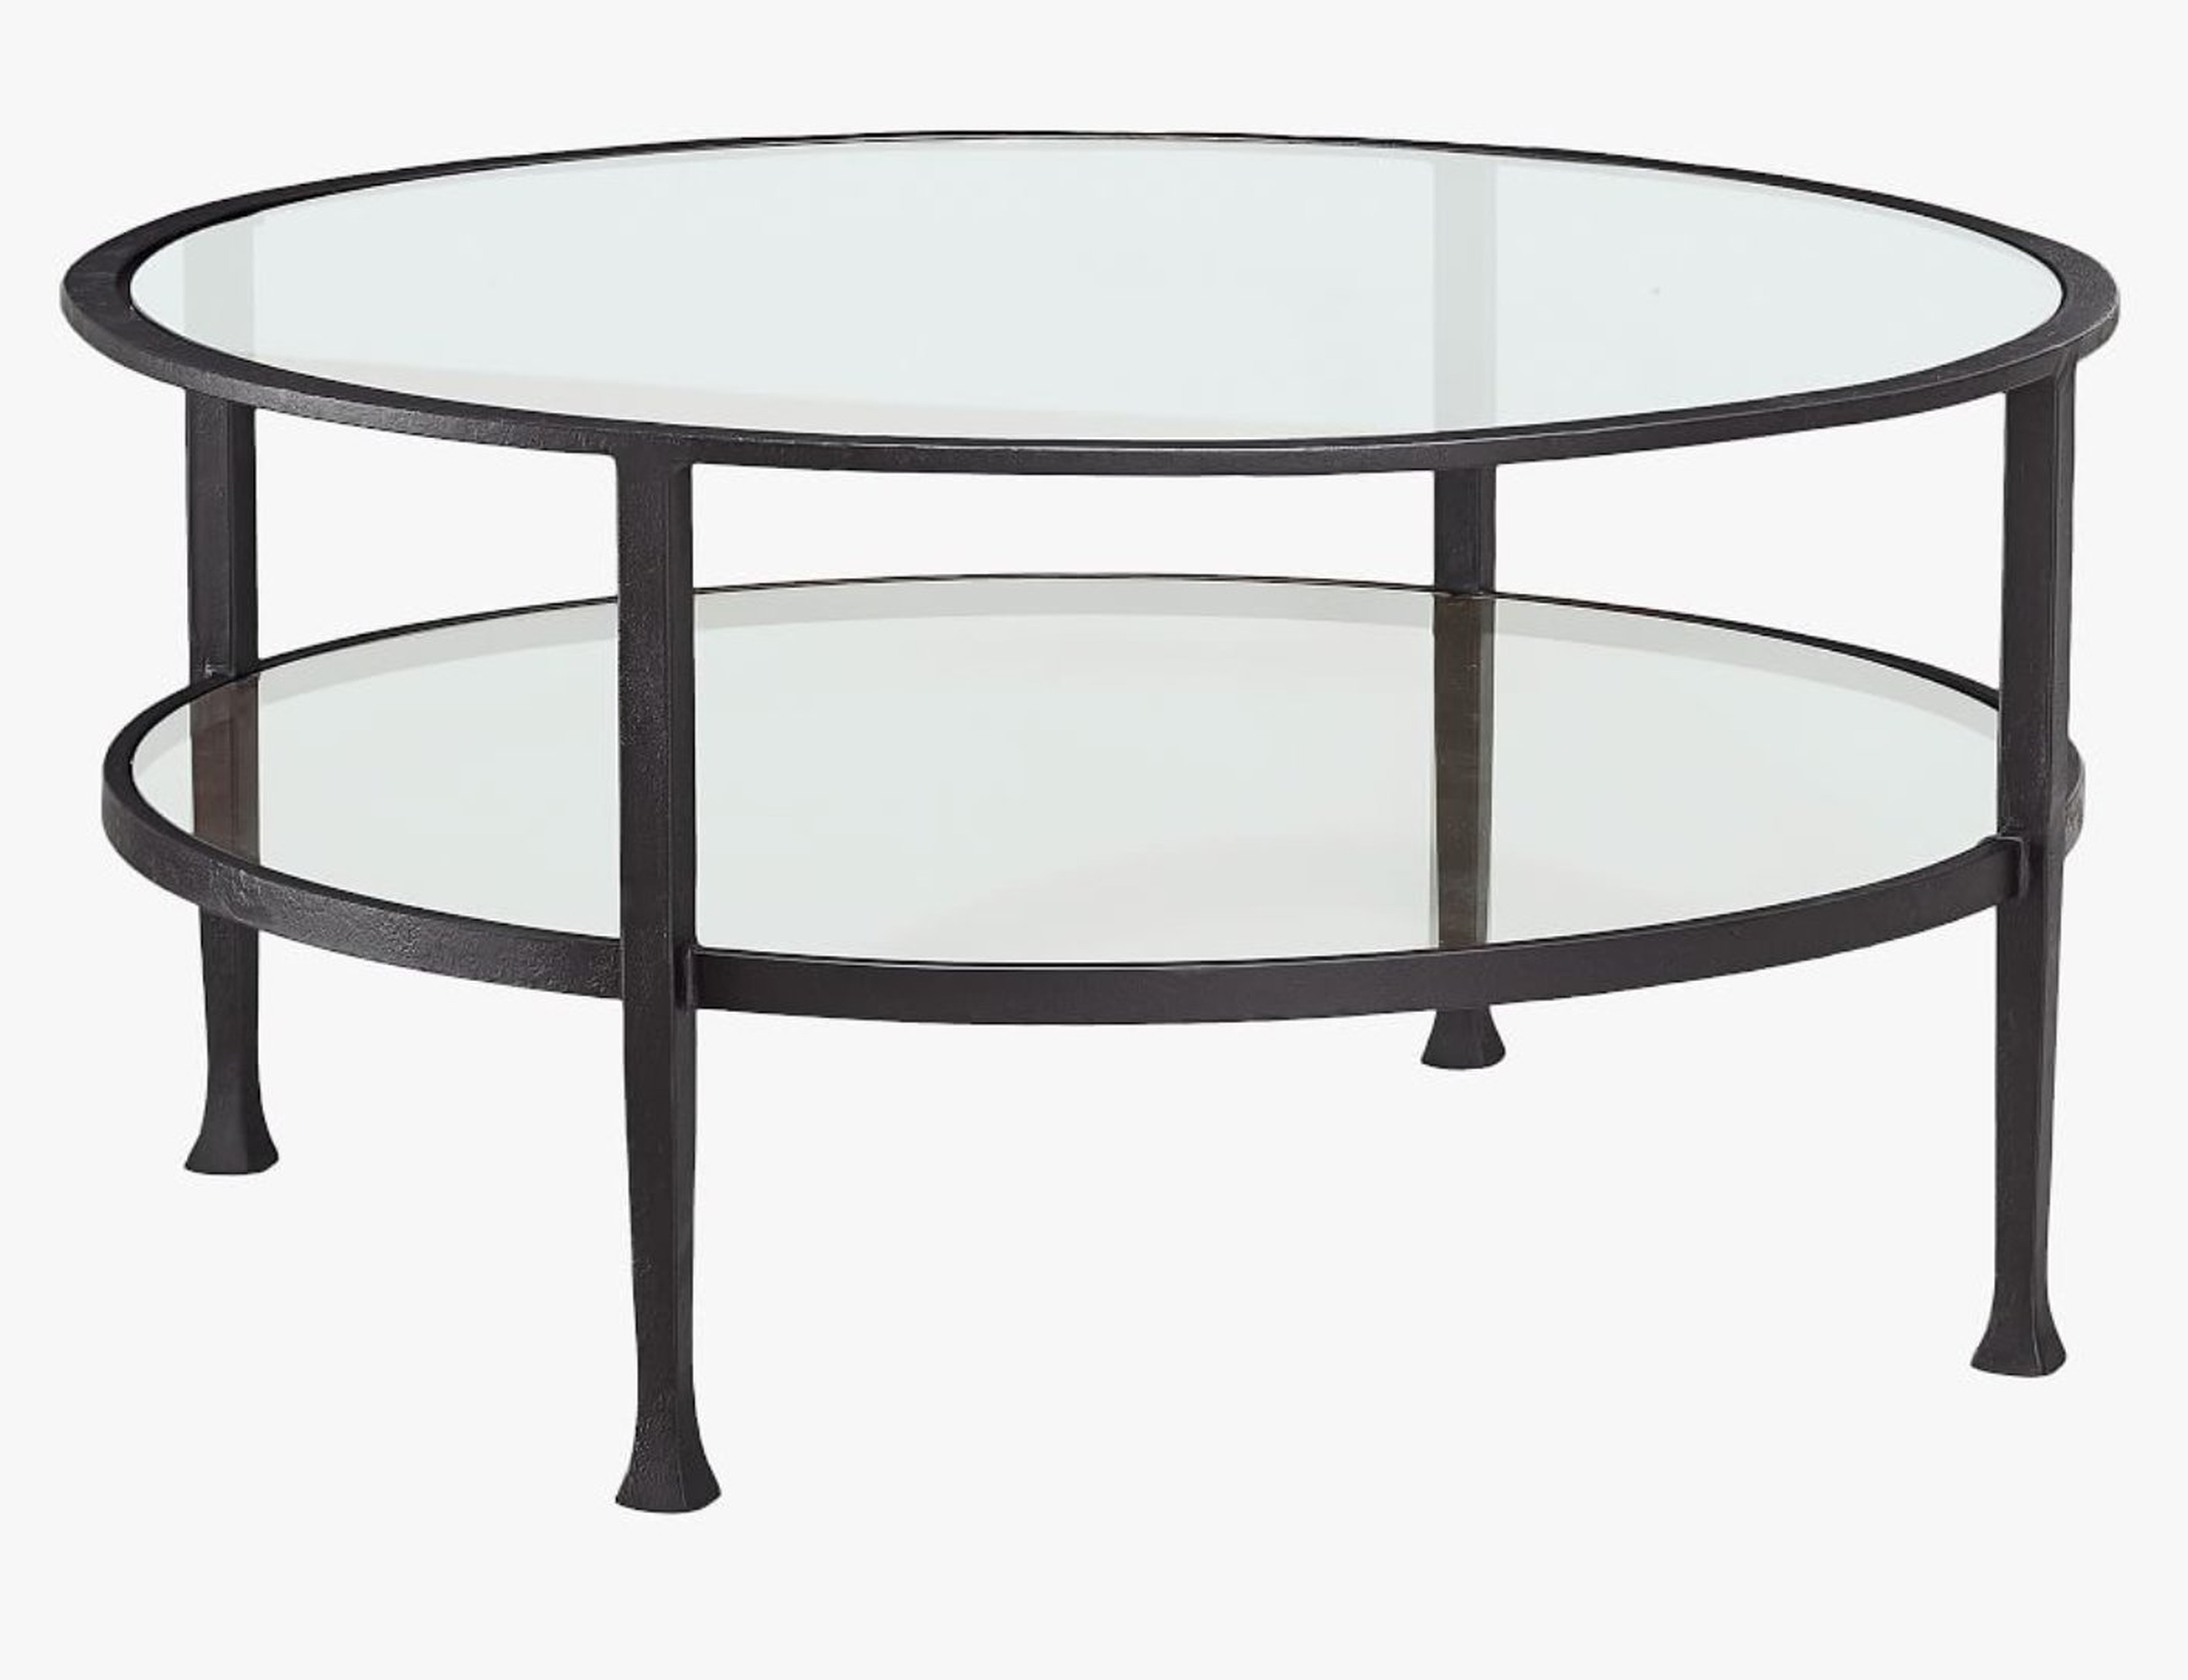 Tanner 36" Round Coffee Table - Pottery Barn